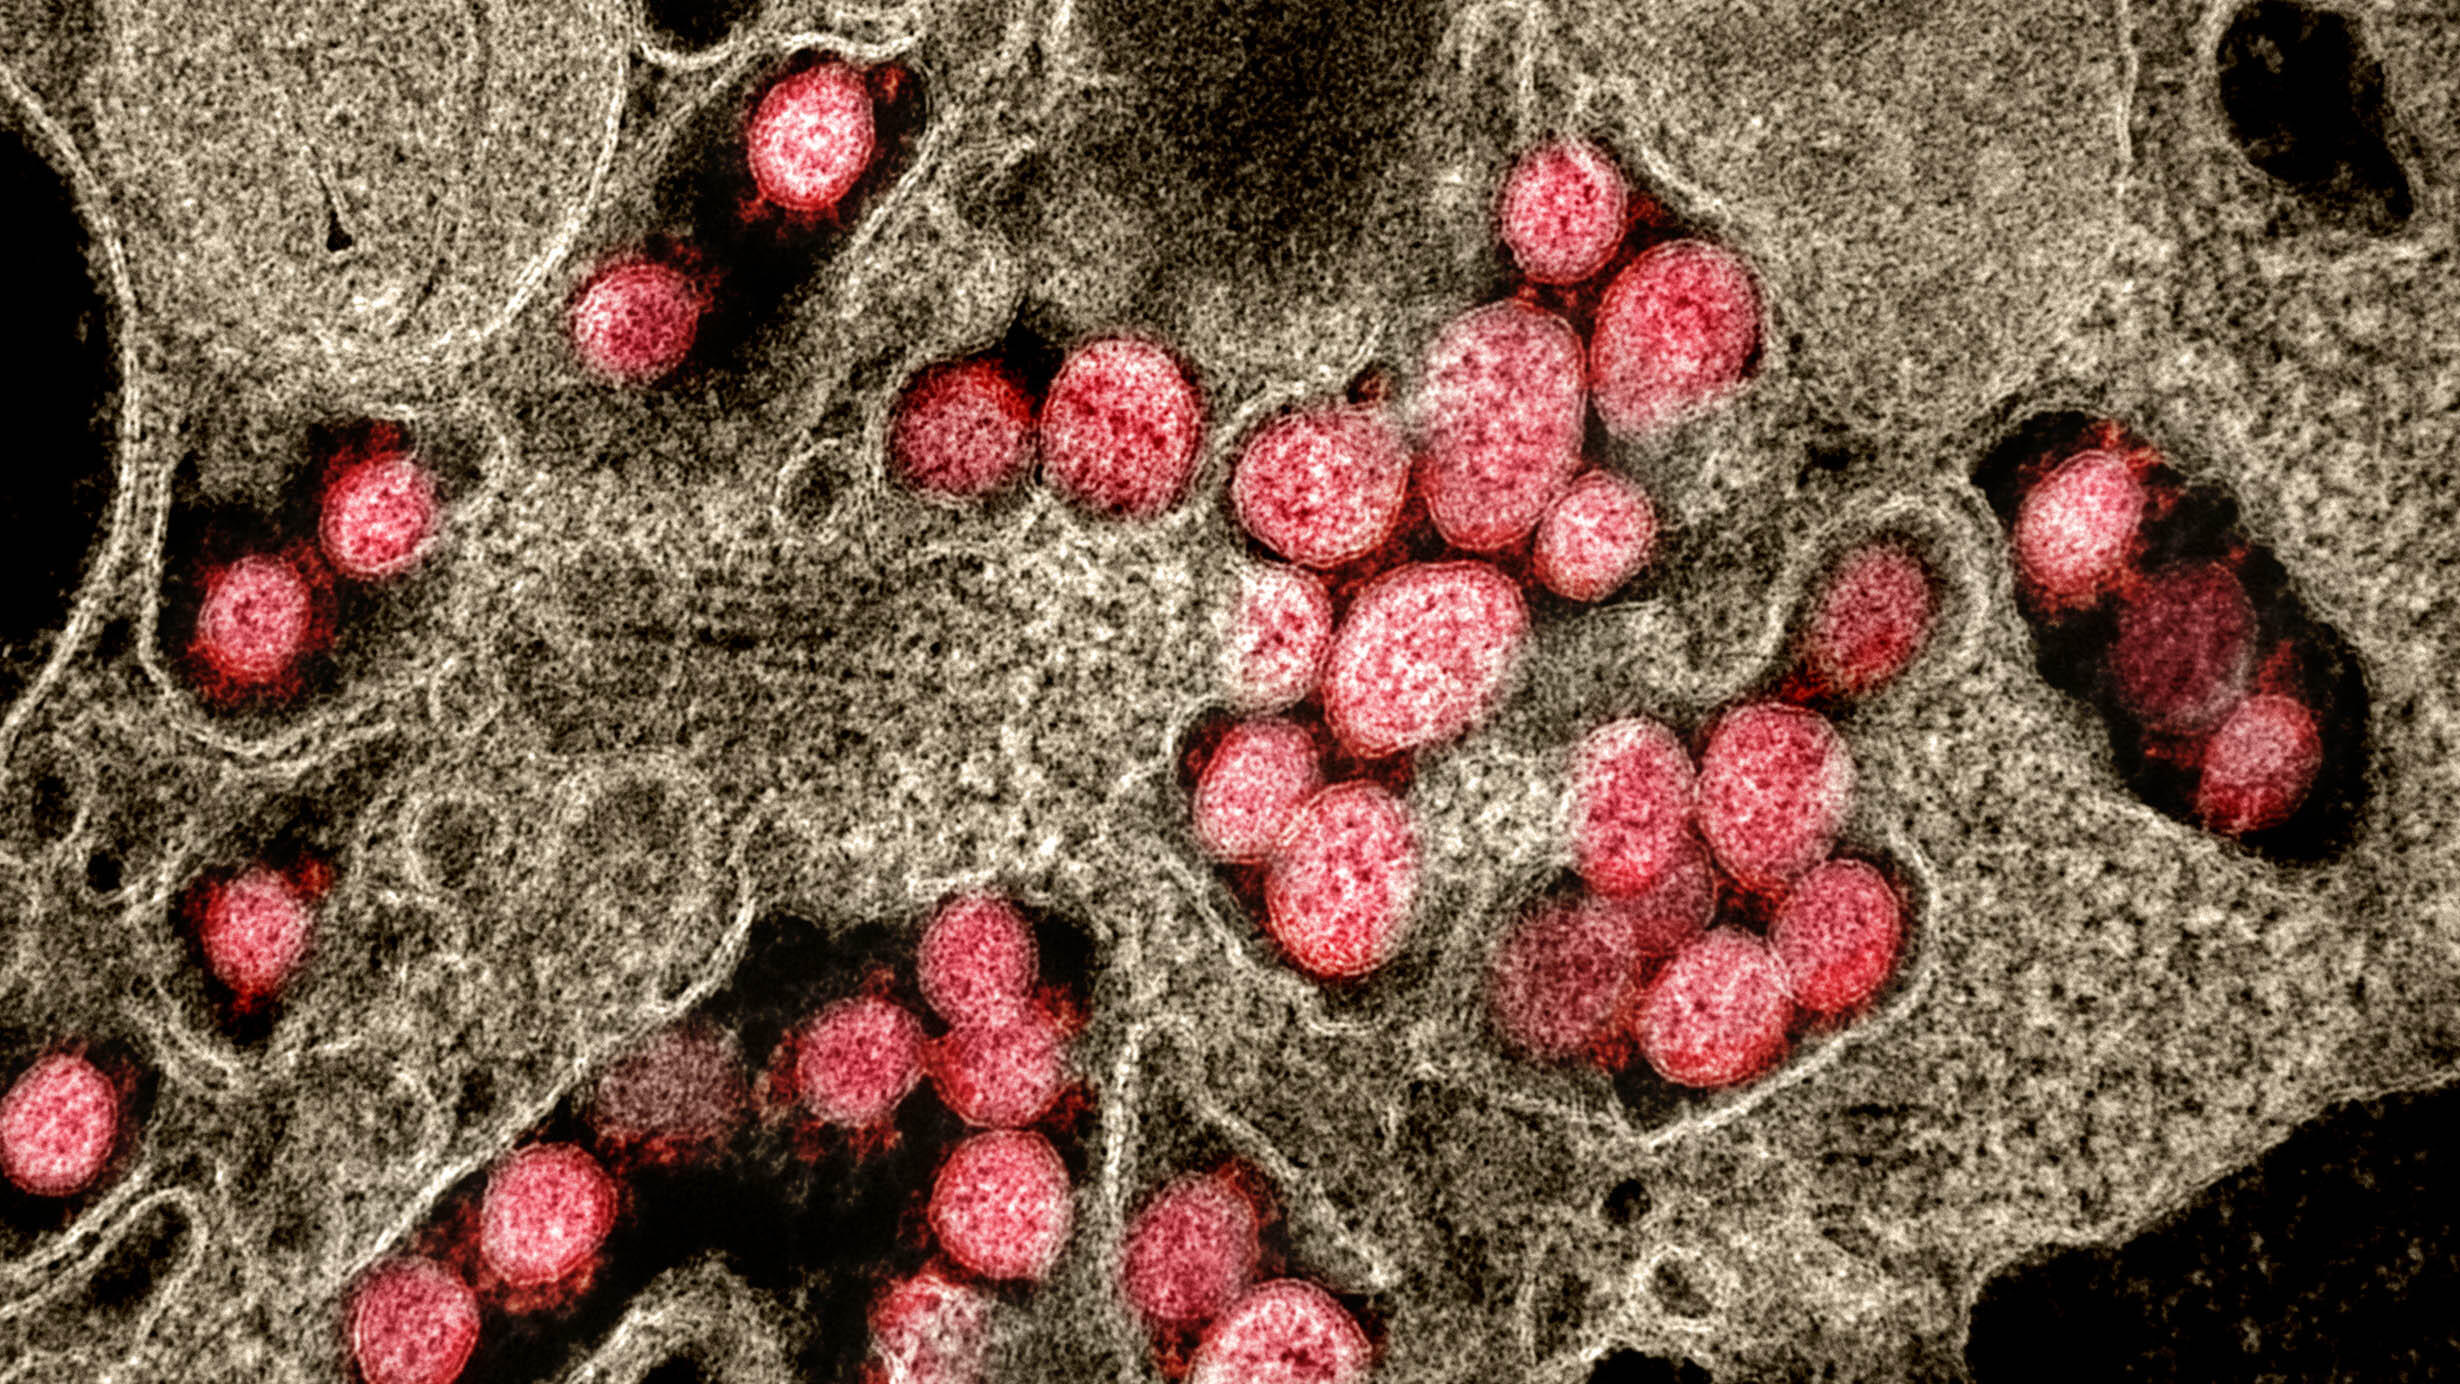 Dozens of round, spiked virus particles viewed within normal tissues.